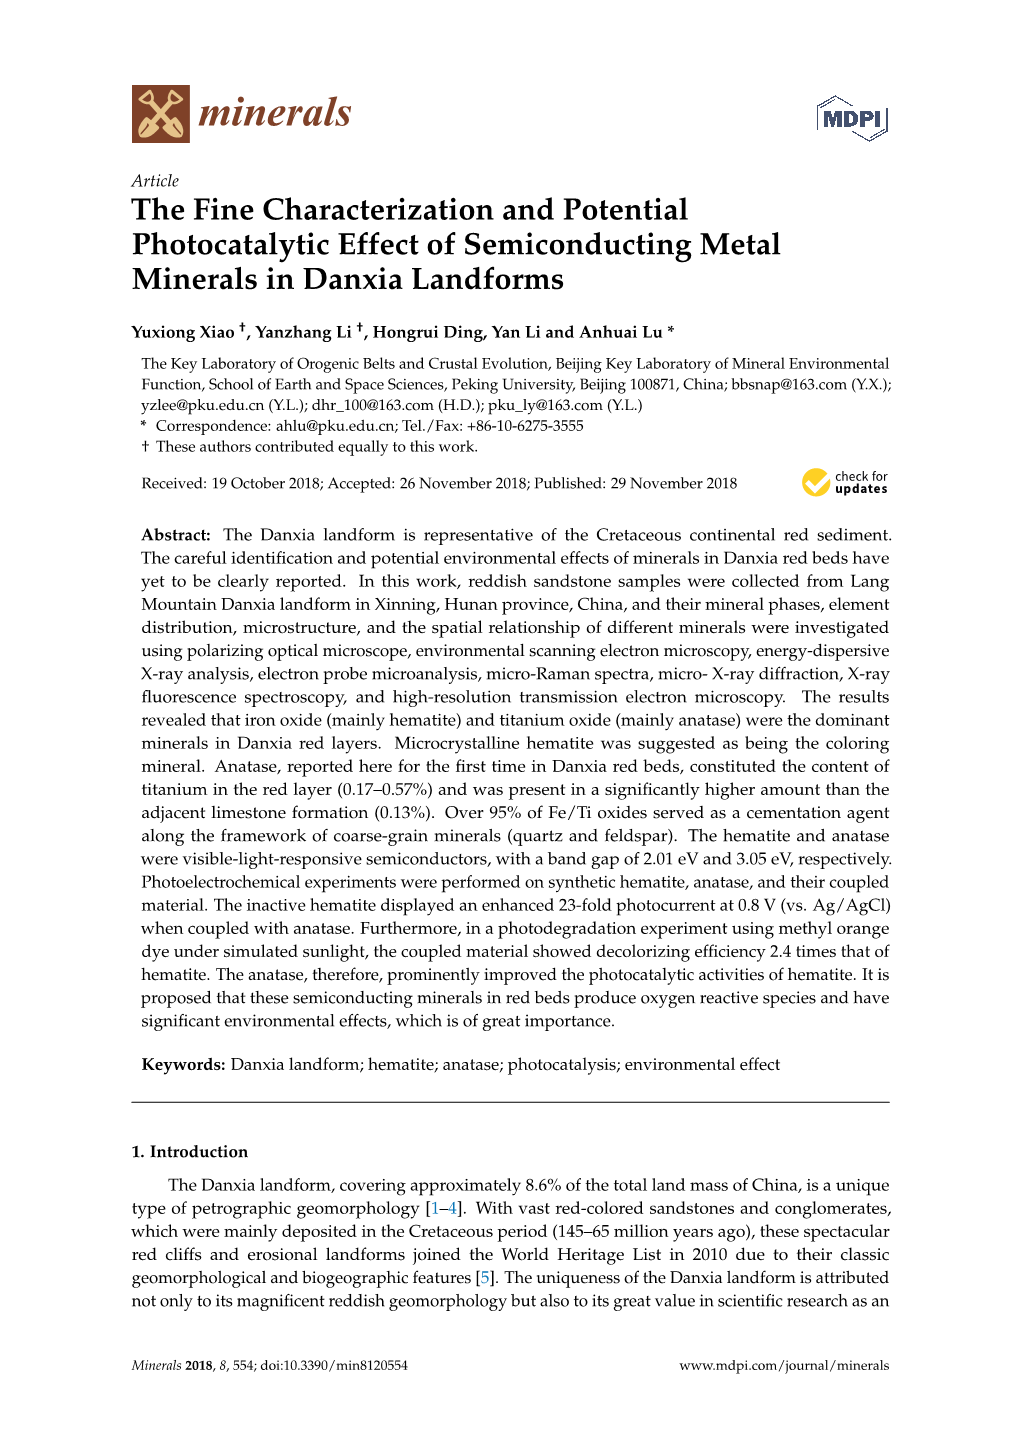 The Fine Characterization and Potential Photocatalytic Effect of Semiconducting Metal Minerals in Danxia Landforms